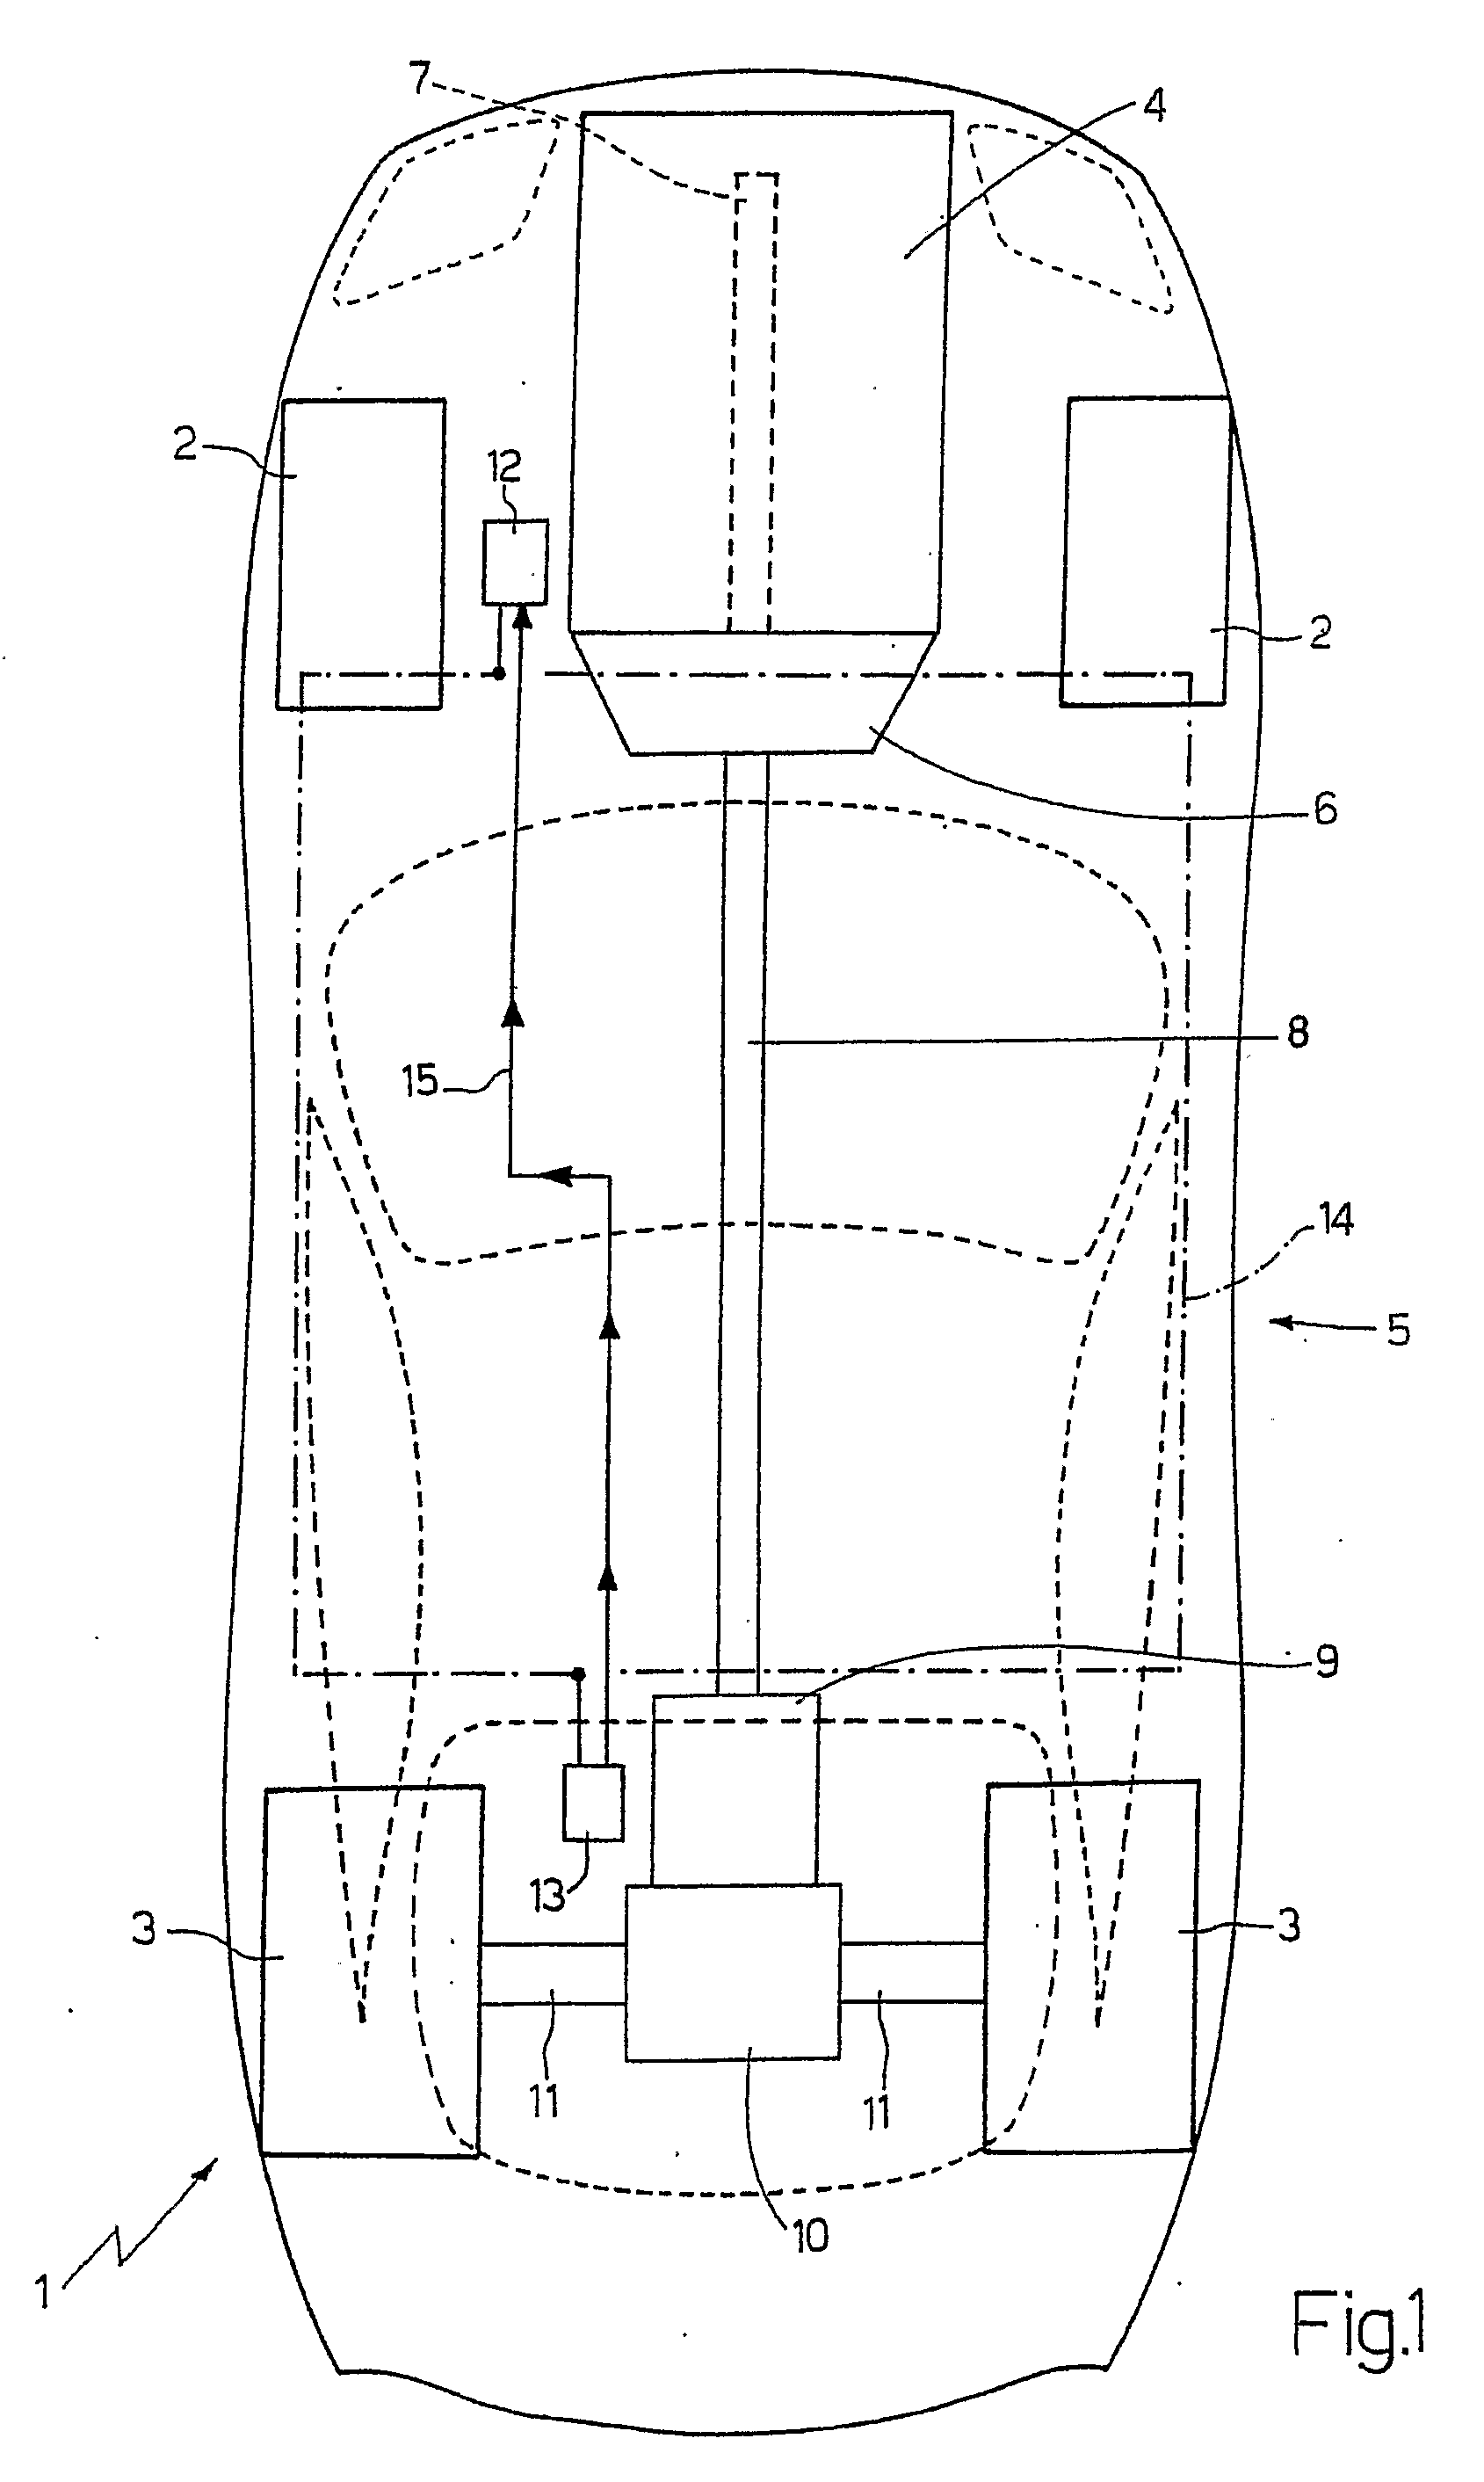 Method of gear-shifting in a servo-controlled manual gearbox